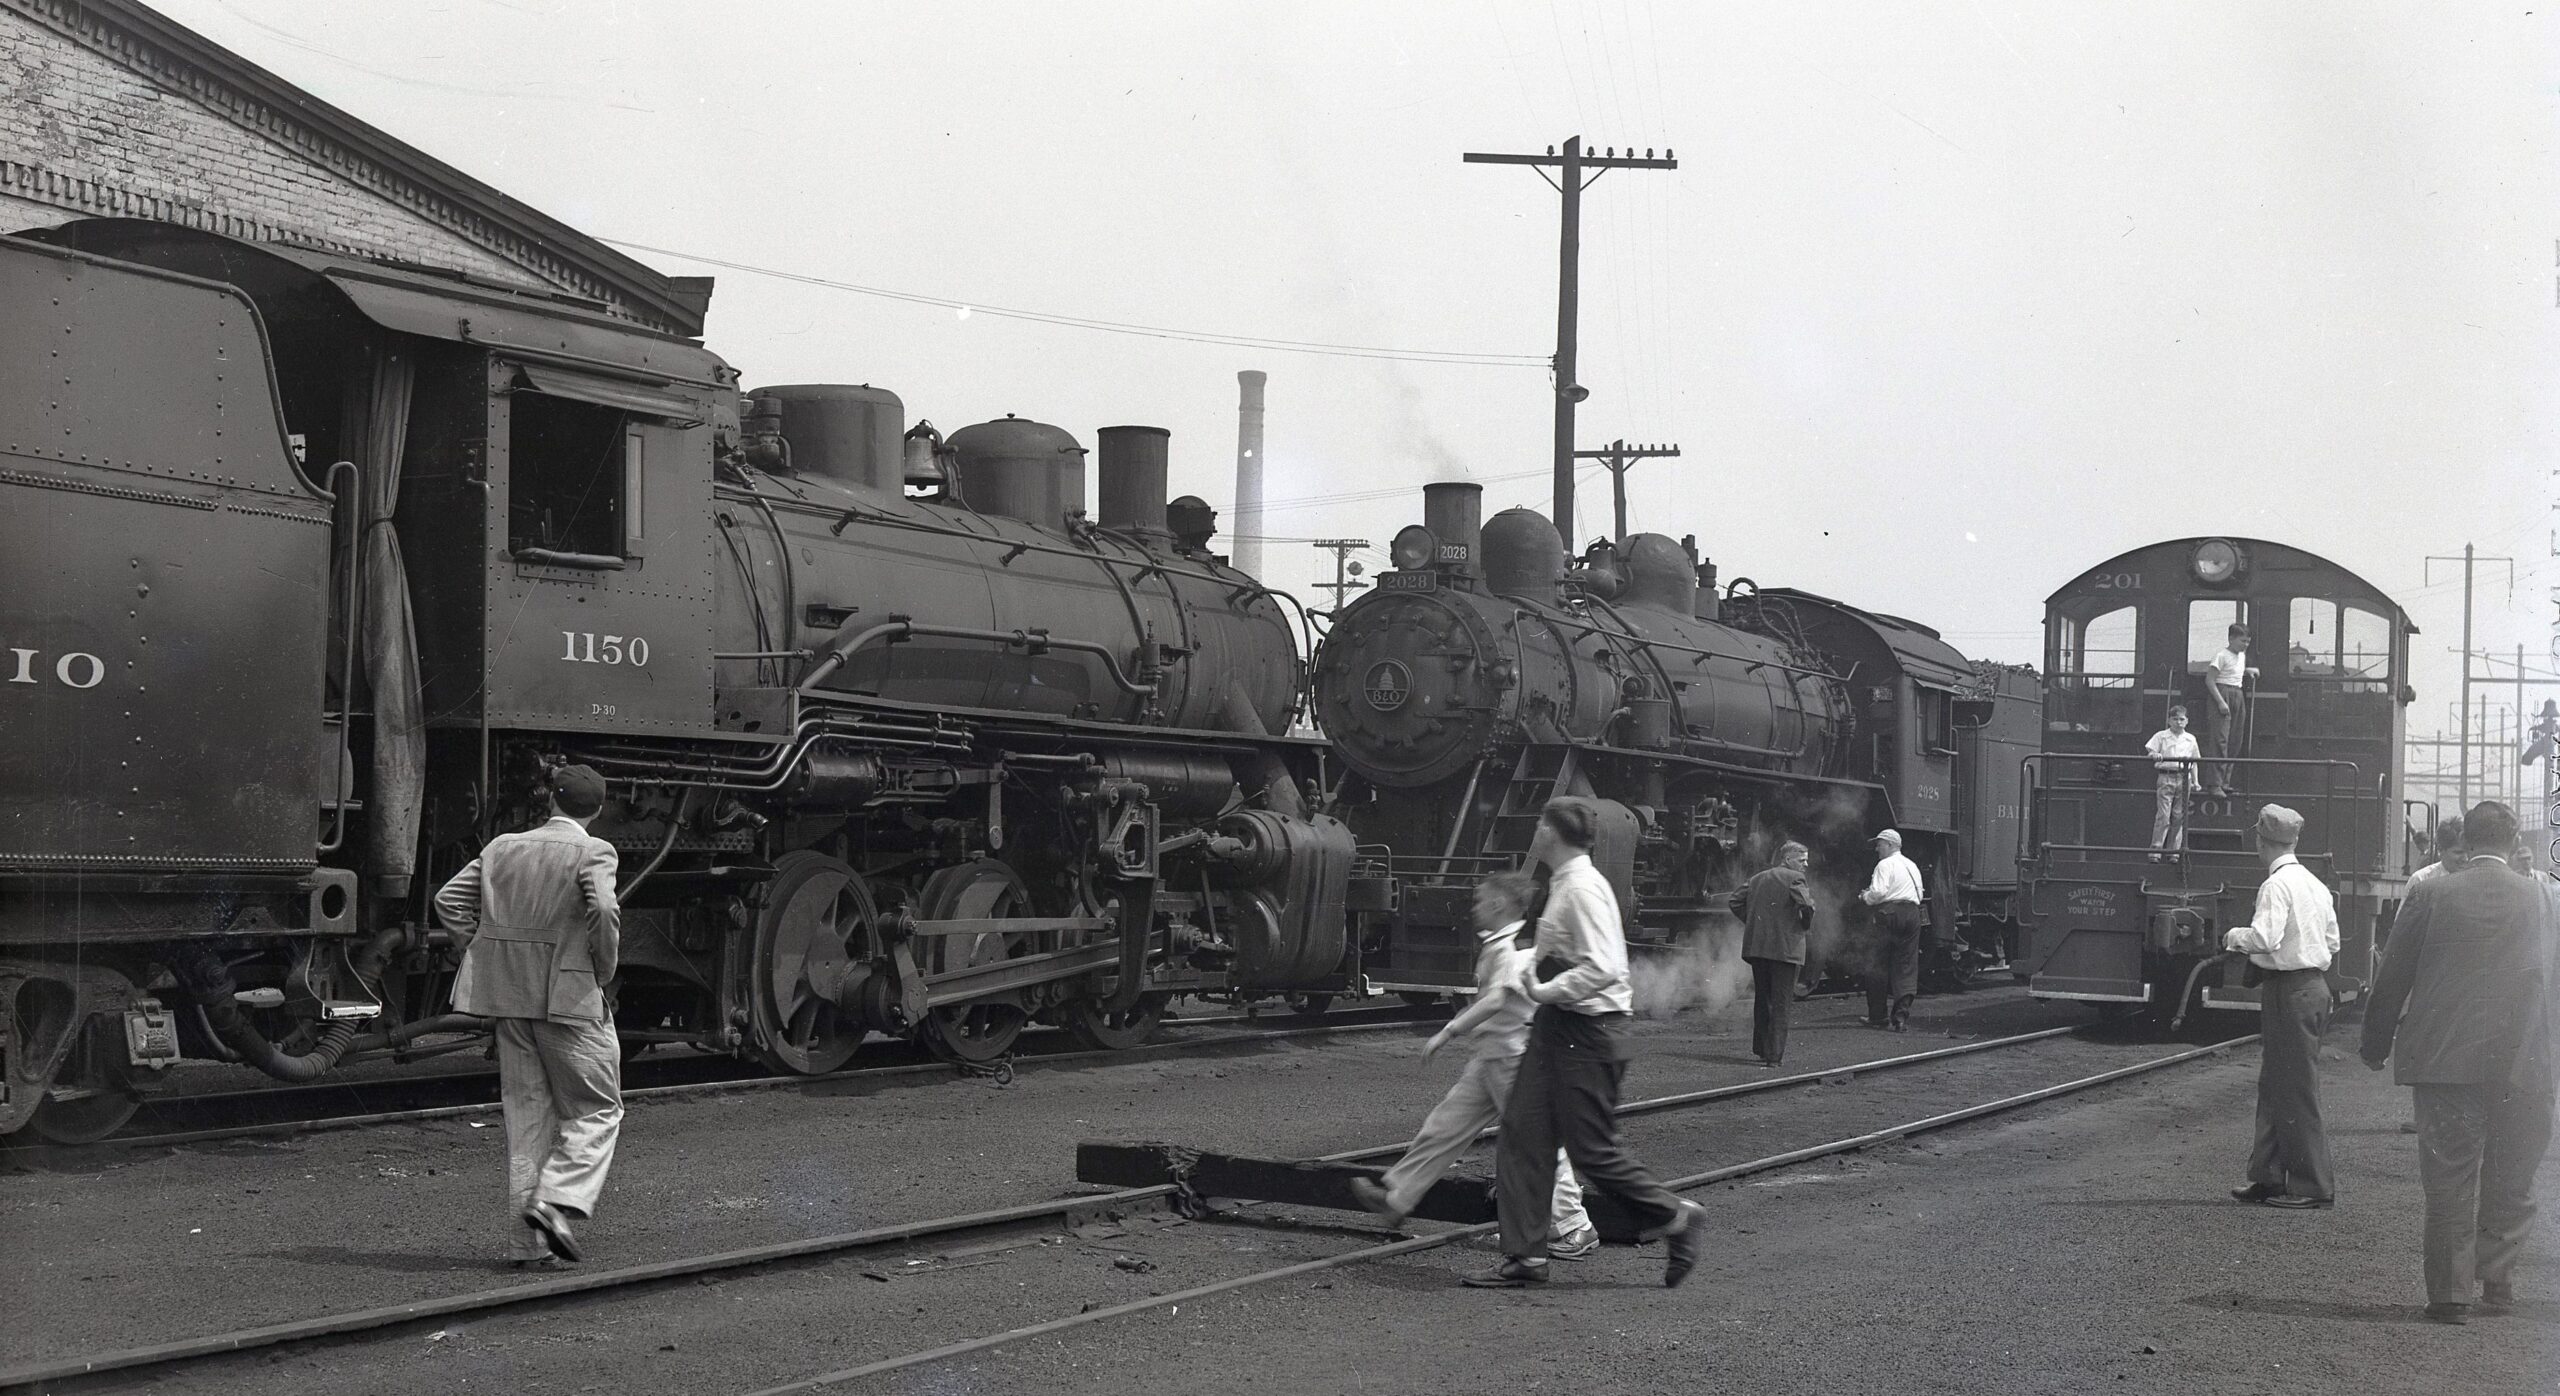 Baltimore and Ohio | Wilmington, Delaware | Class D44 0-6-0 1150 steam locomotive | Class E41 2-8-0 2028 steam locomotive| Diesel switcher 201 | June 3, 1951 | R.L. Long photo